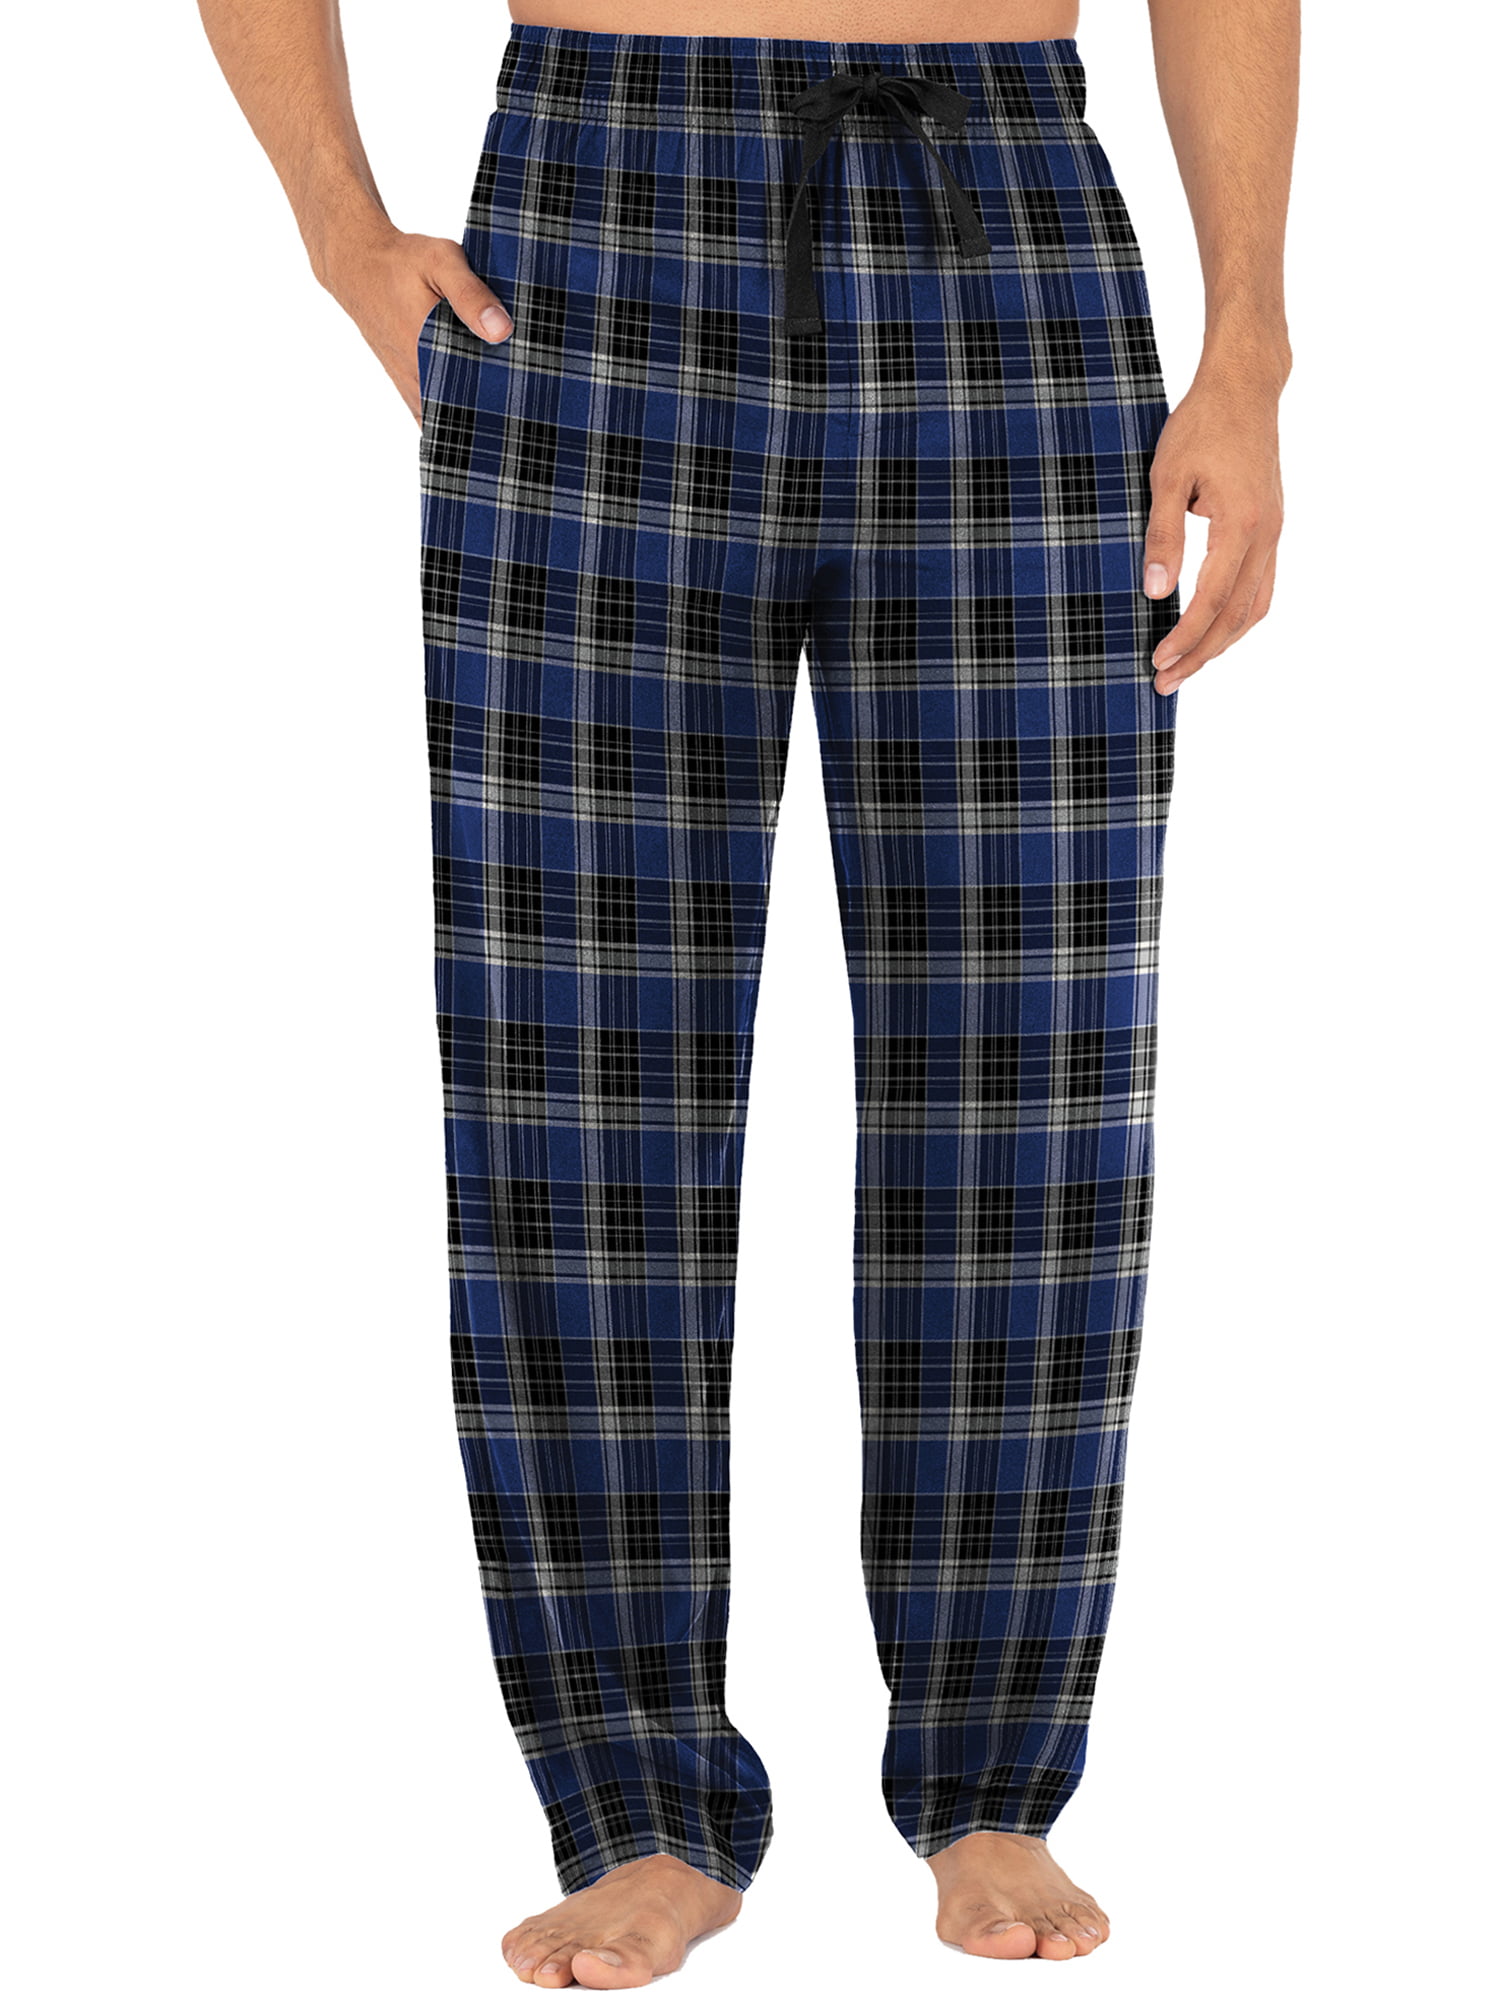 lv pyjamas for Sale,Up To OFF 65%